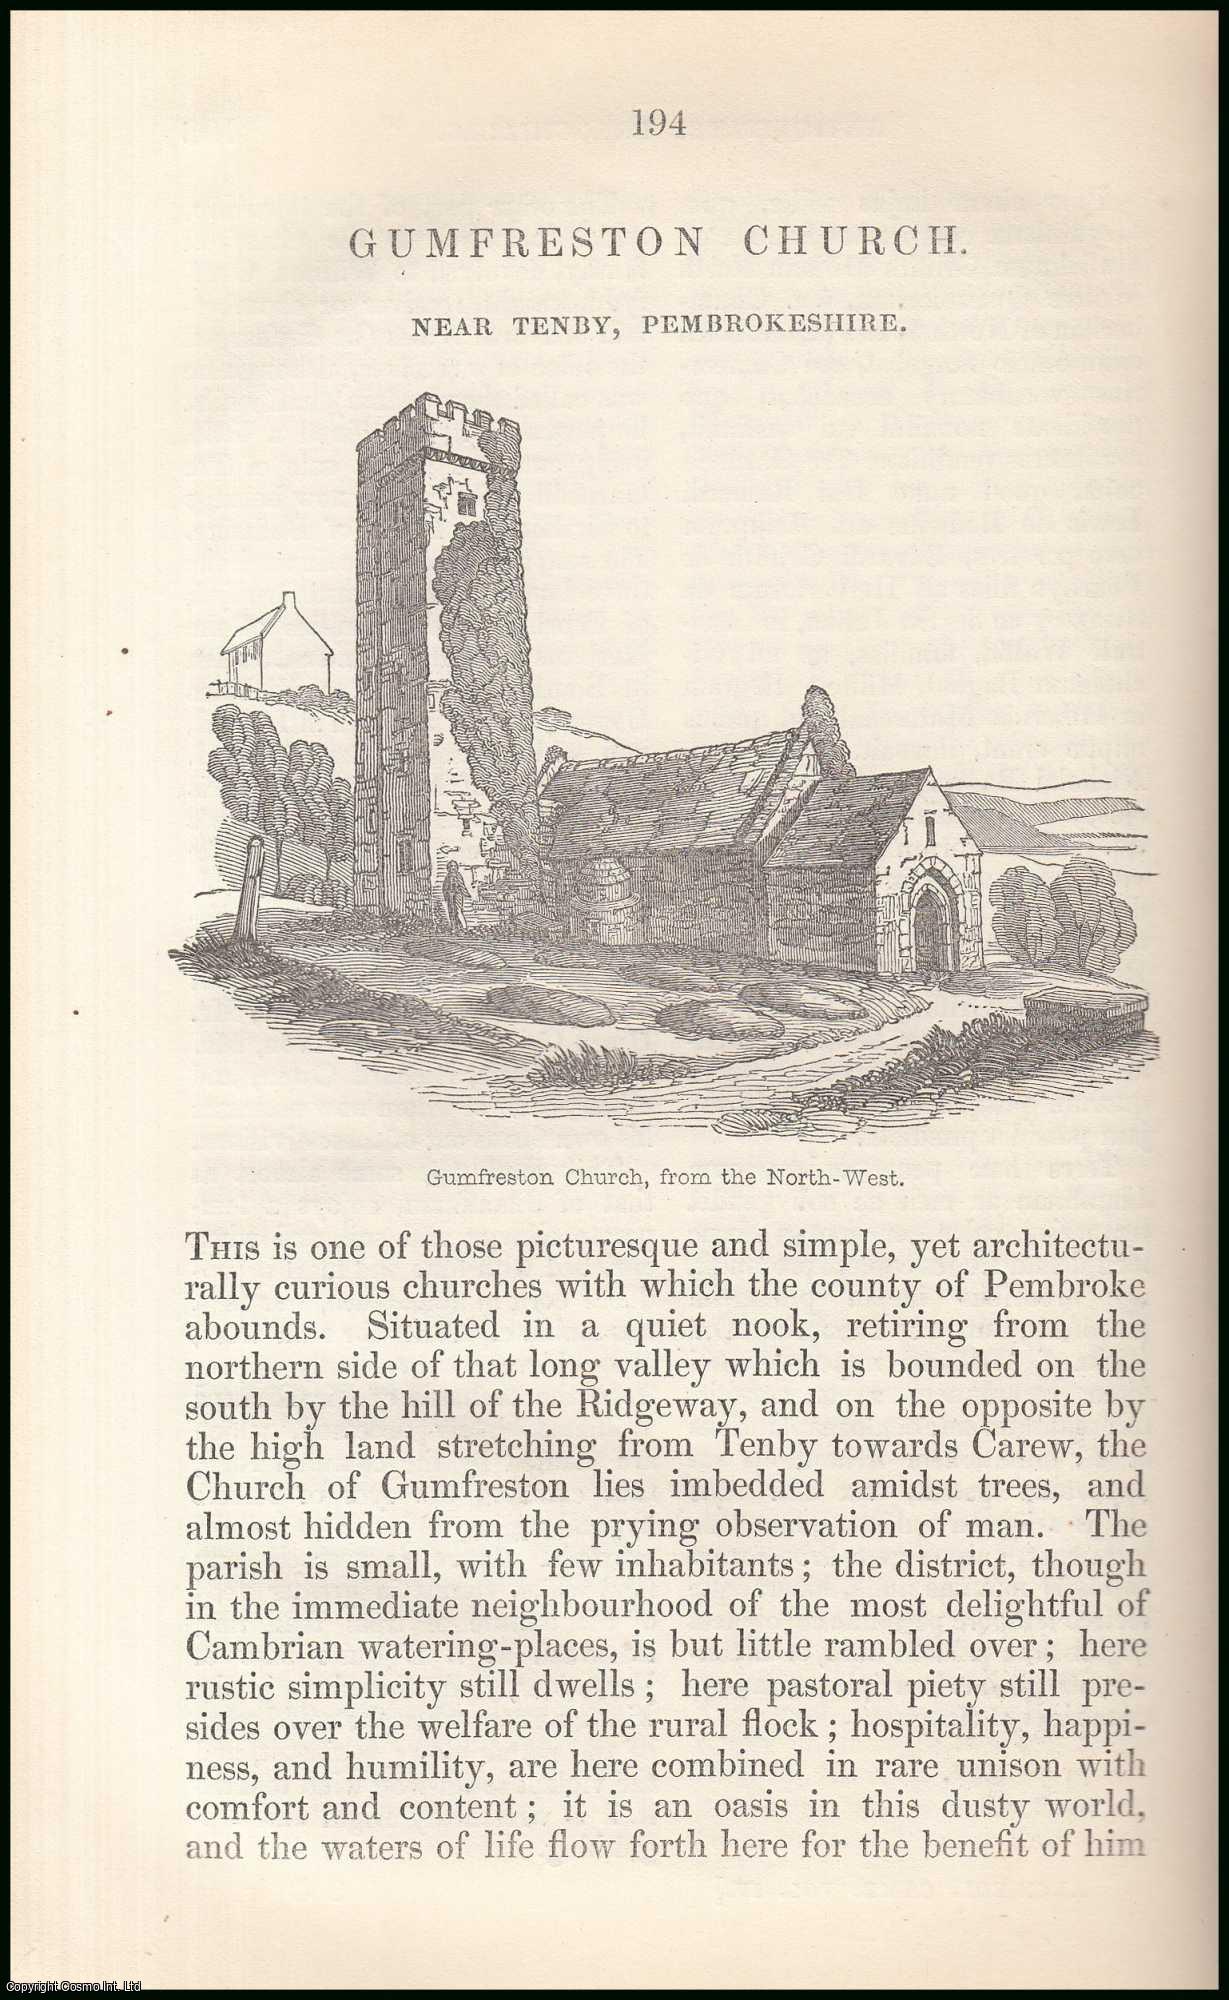 H.L.J. - Gumfreston Church, Near Tenby, Pembrokeshire. An original article from the Archaeologia Cambrensis, a Record of The Antiquities of Wales & its Marches, 1849.